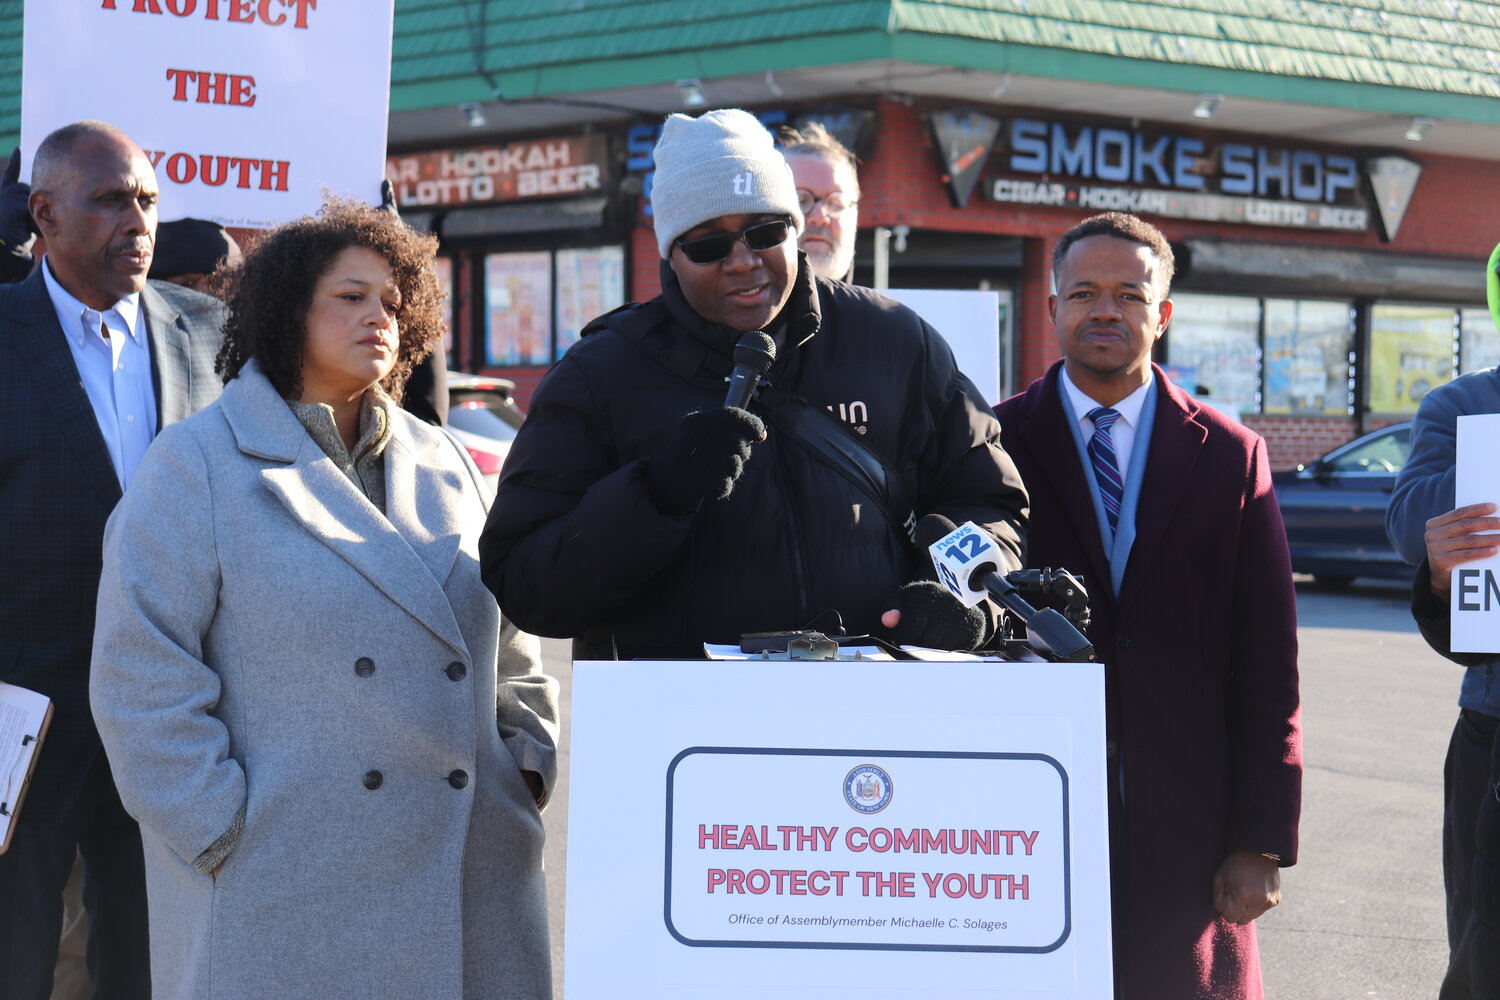 Gotham Avenue School Parent Teacher Association vice president Dale Davis, a father in the Elmont community, speaks out against the harm that vape products can cause at a presser with Assemblywoman Michaelle Solages and County Legislator Carrié Solages.